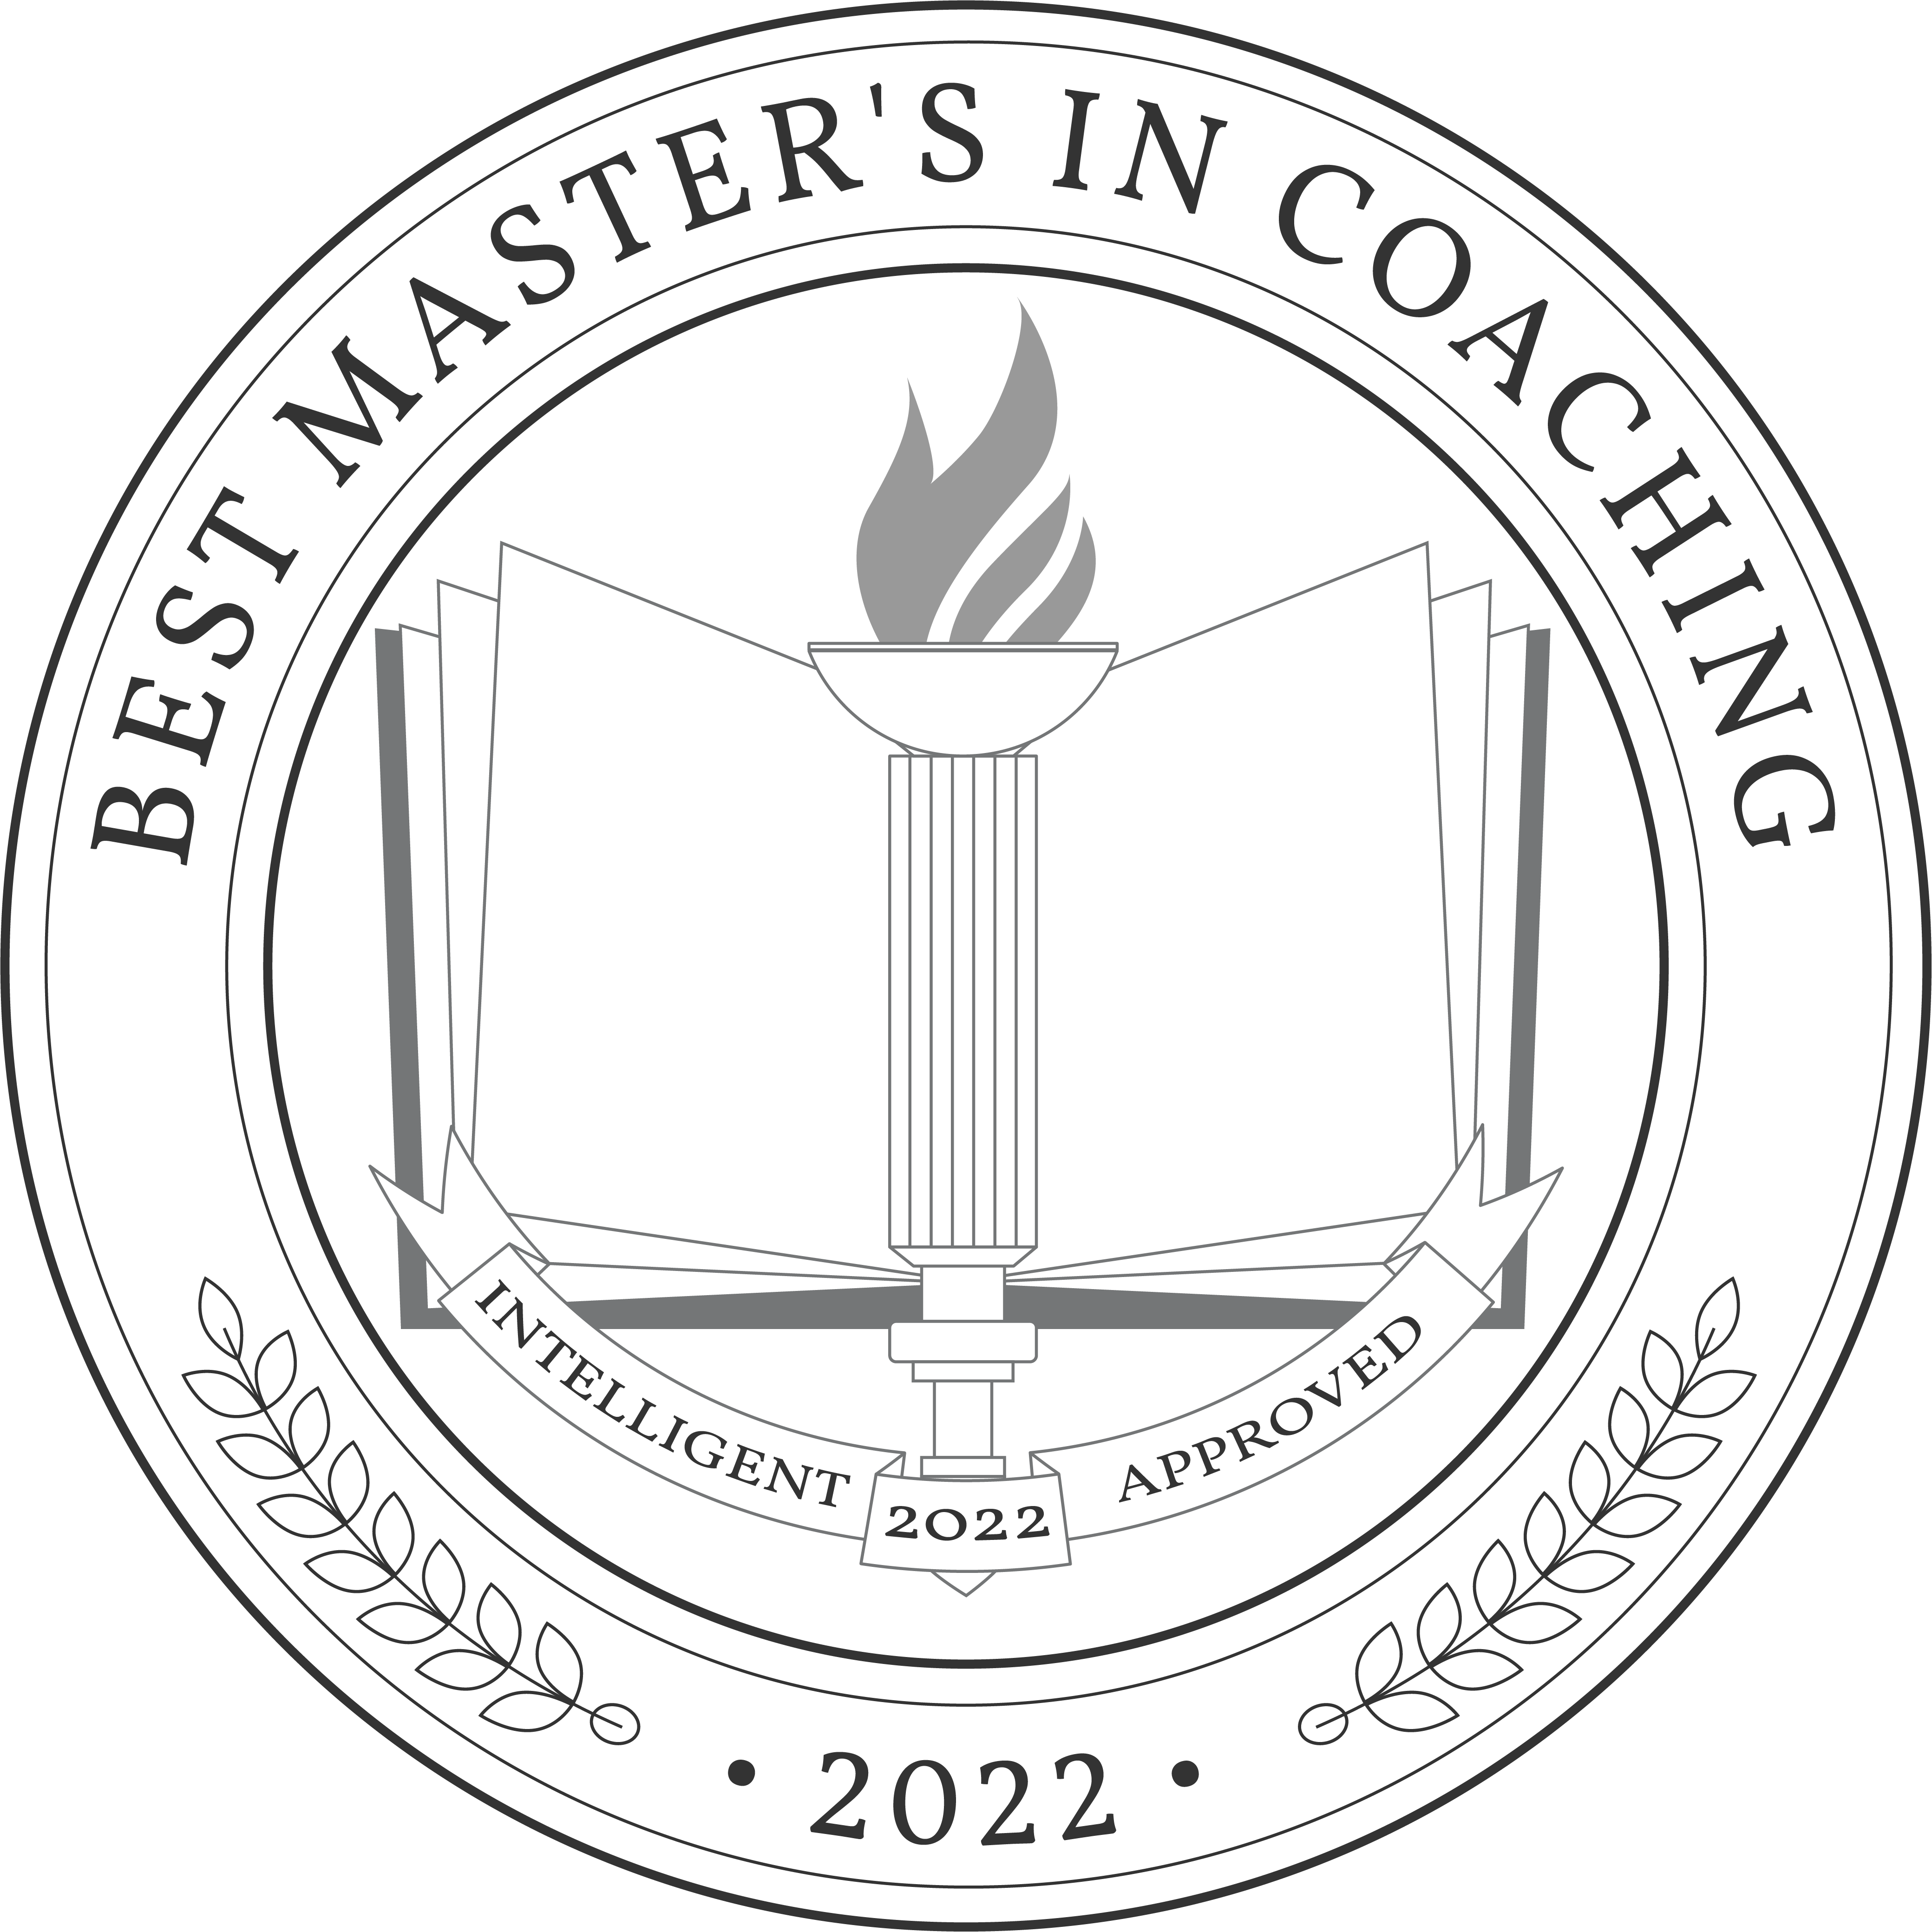 Best Master's in Coaching Degree Programs